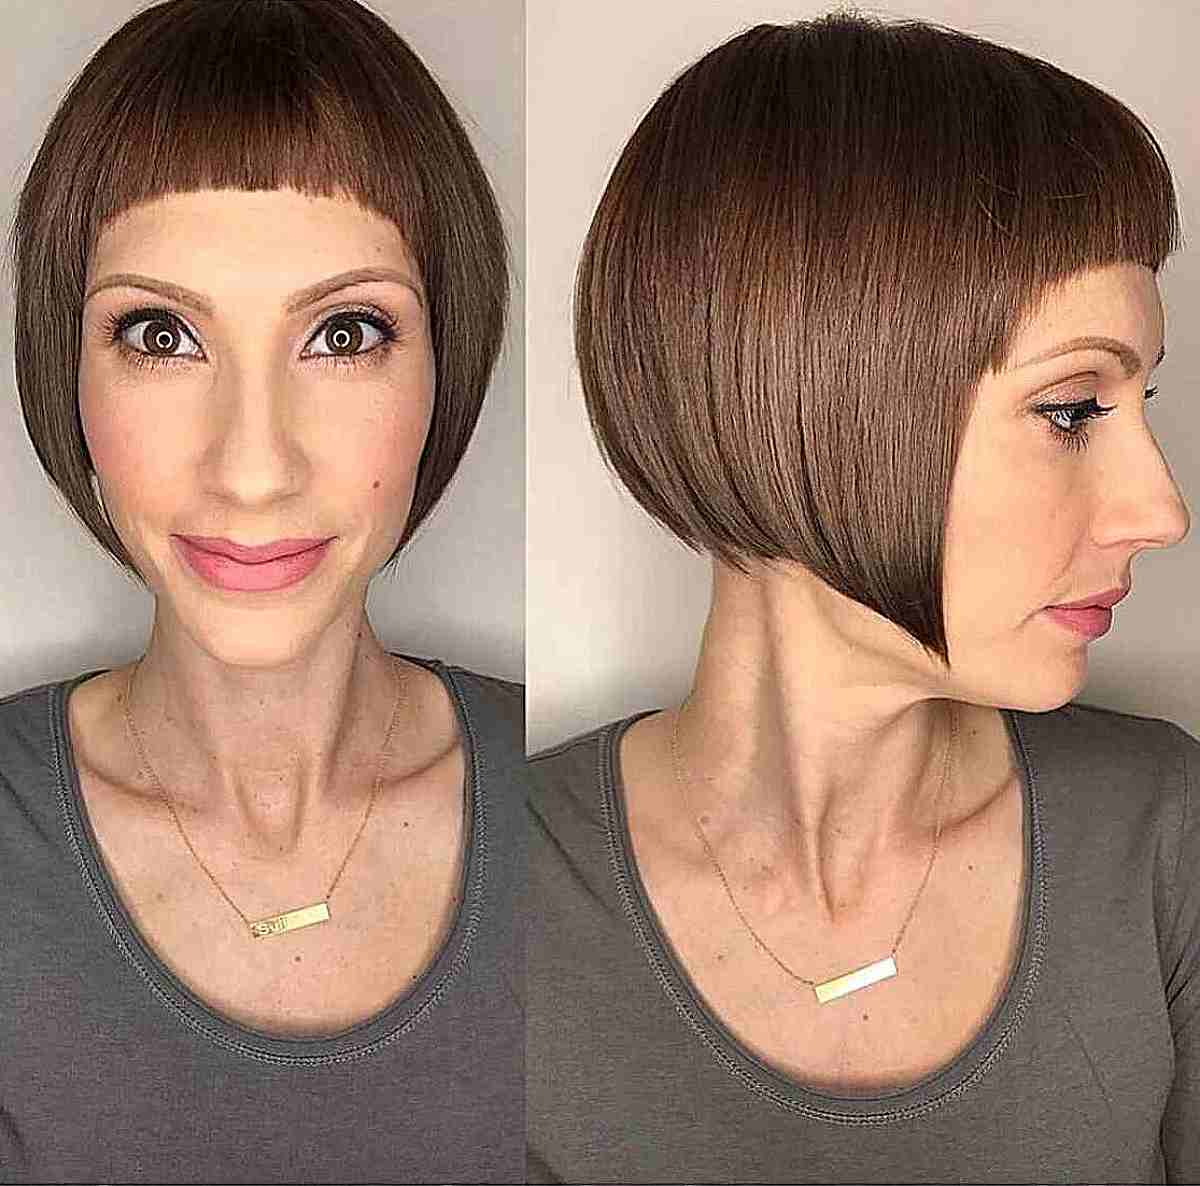 Sleek A-Line Bob with Very Short Rounded Bangs for Long Faces